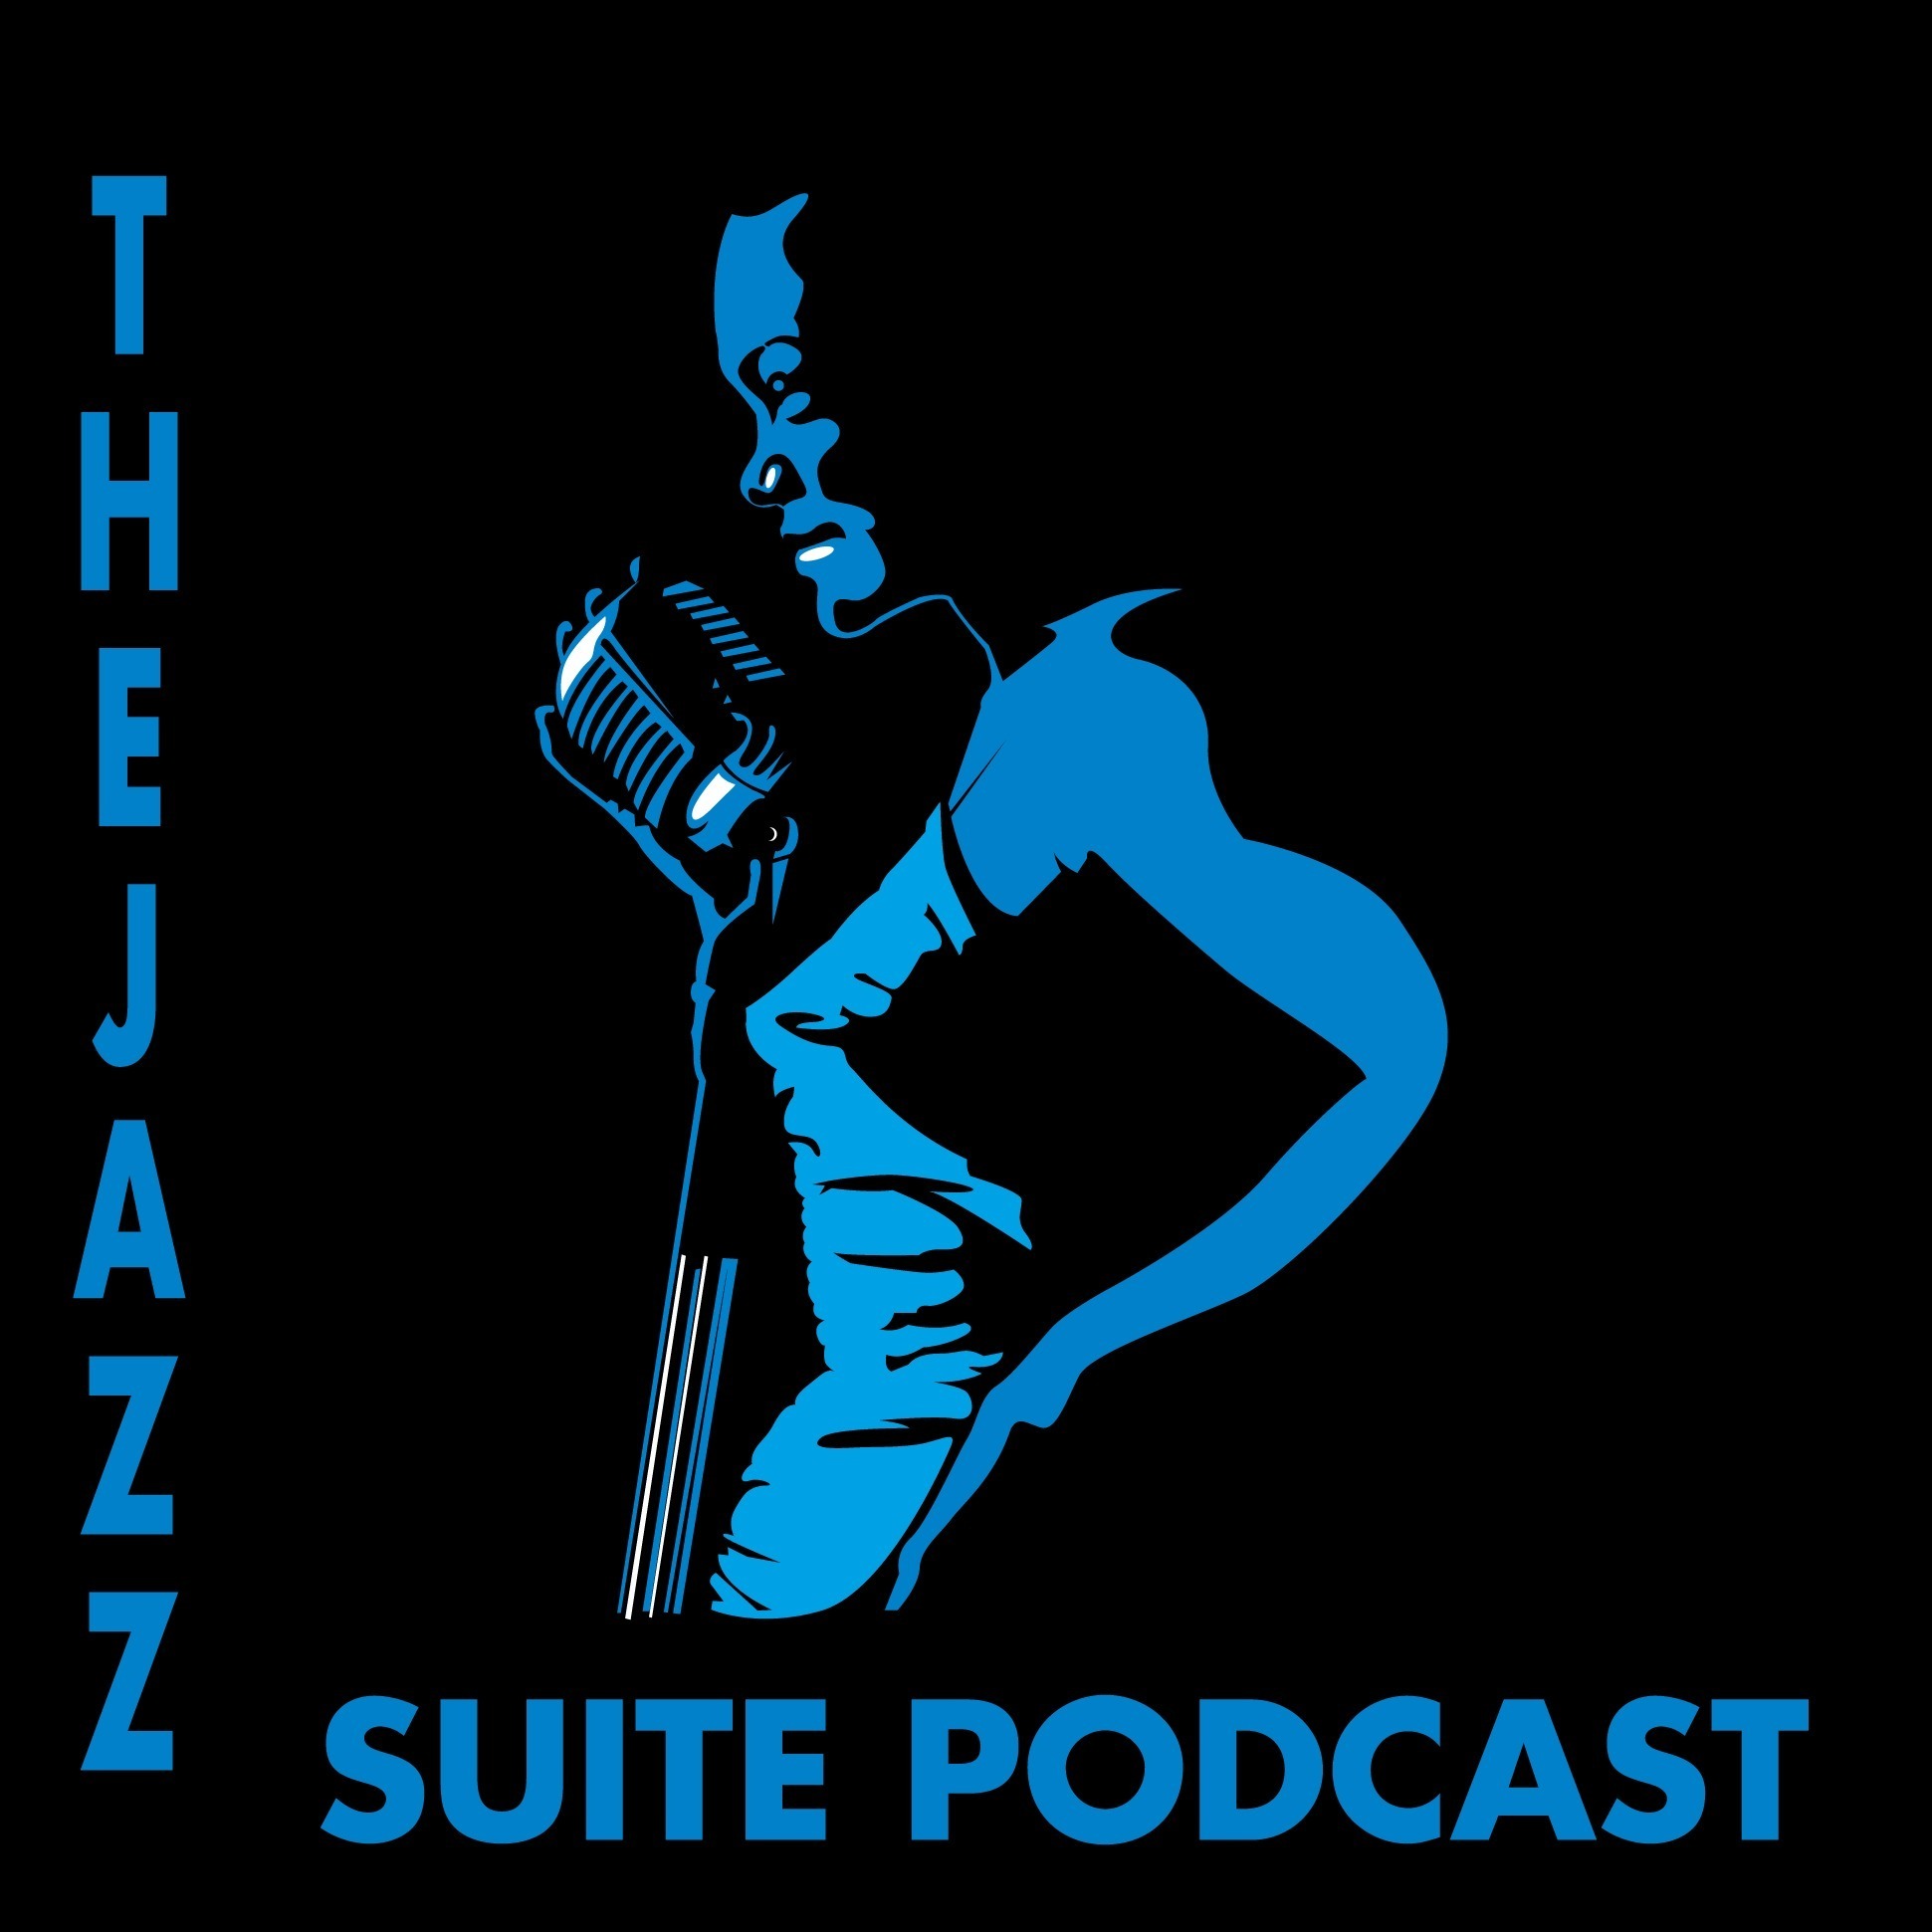 The Jazz Suite Podcast #451 (Take 6 Dedication)